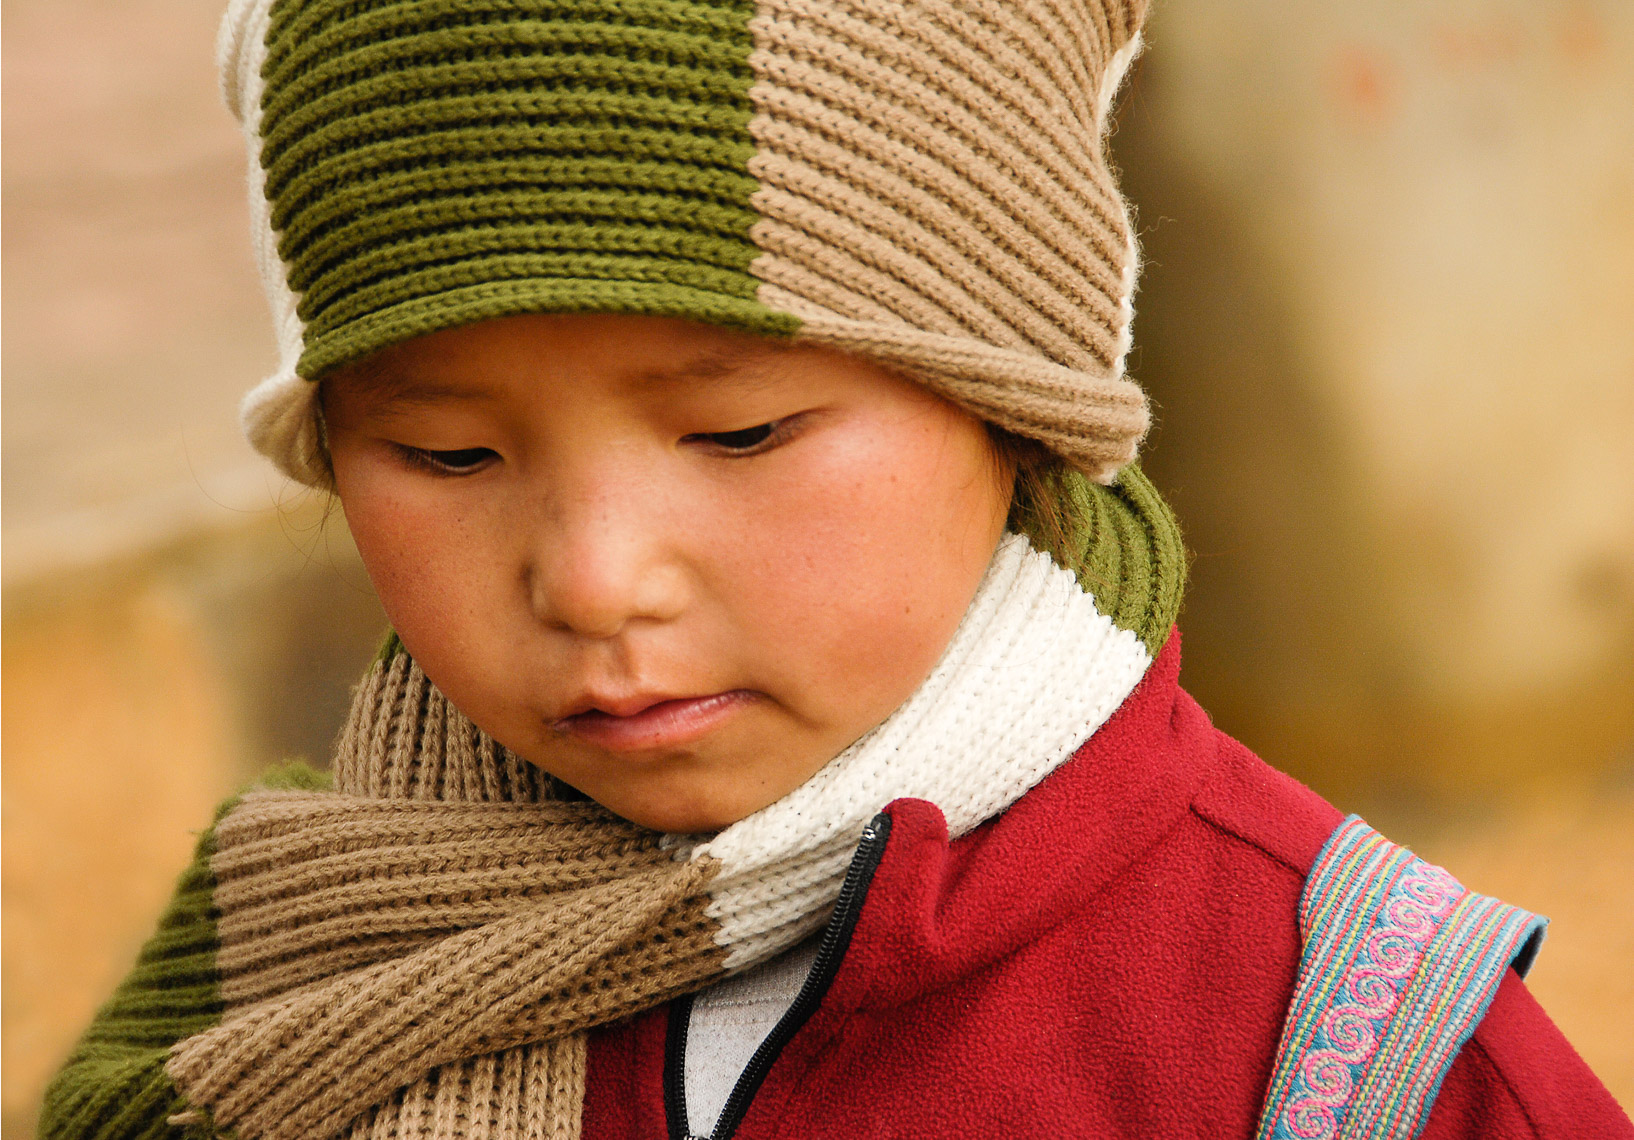 TP_1-13.  I captured this image of a young boy in the Sapa region of North Viet Nam